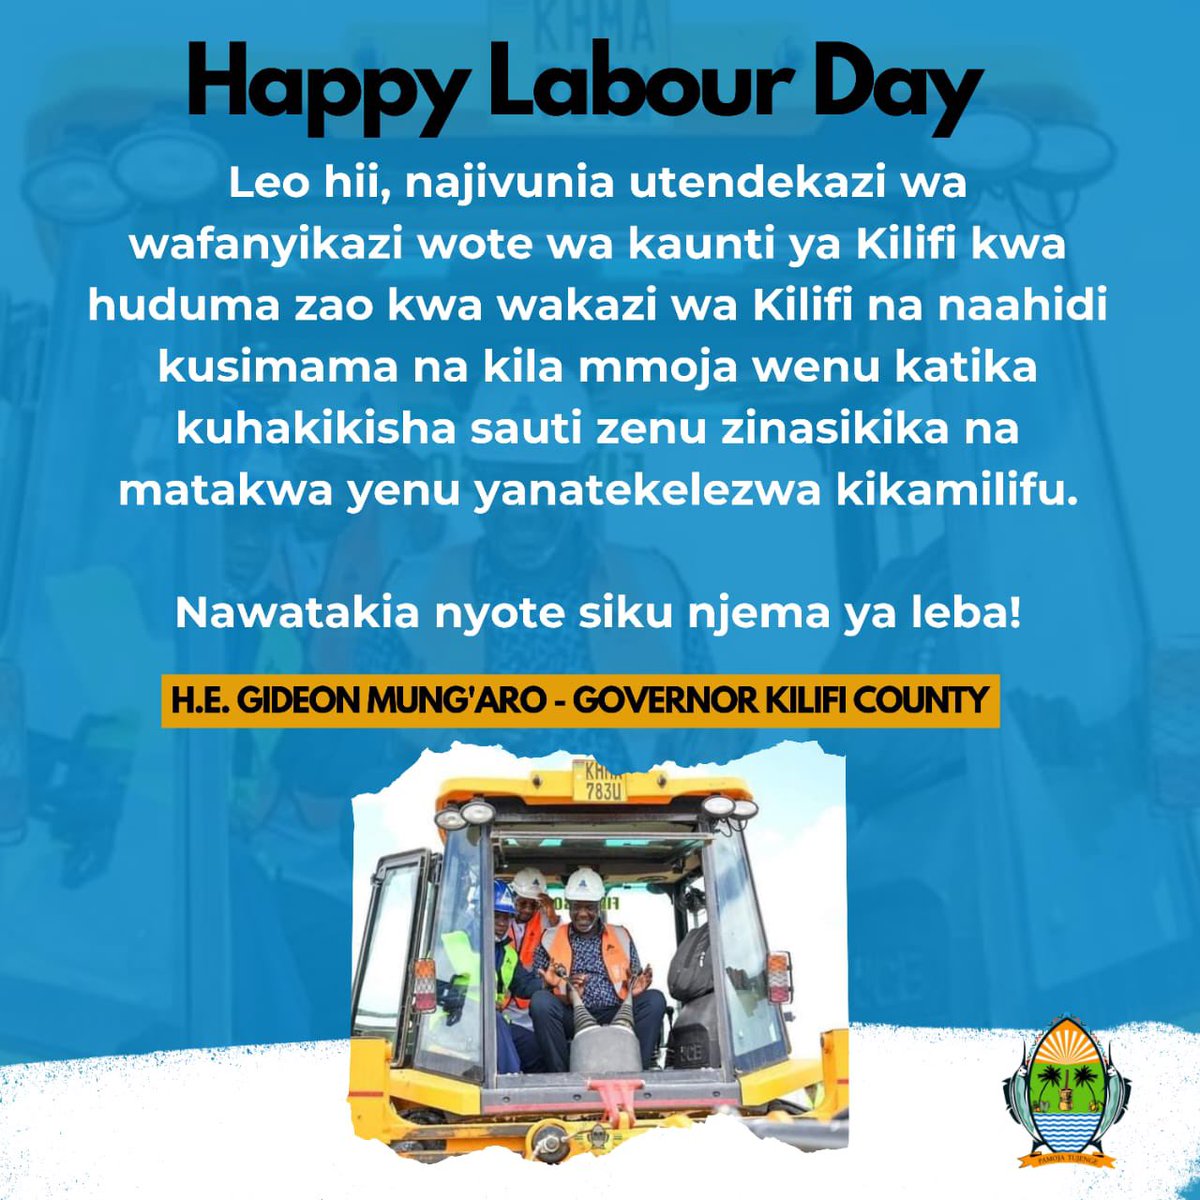 Happy Labour Day to all residents of Kilifi County! #HappyLabourDay